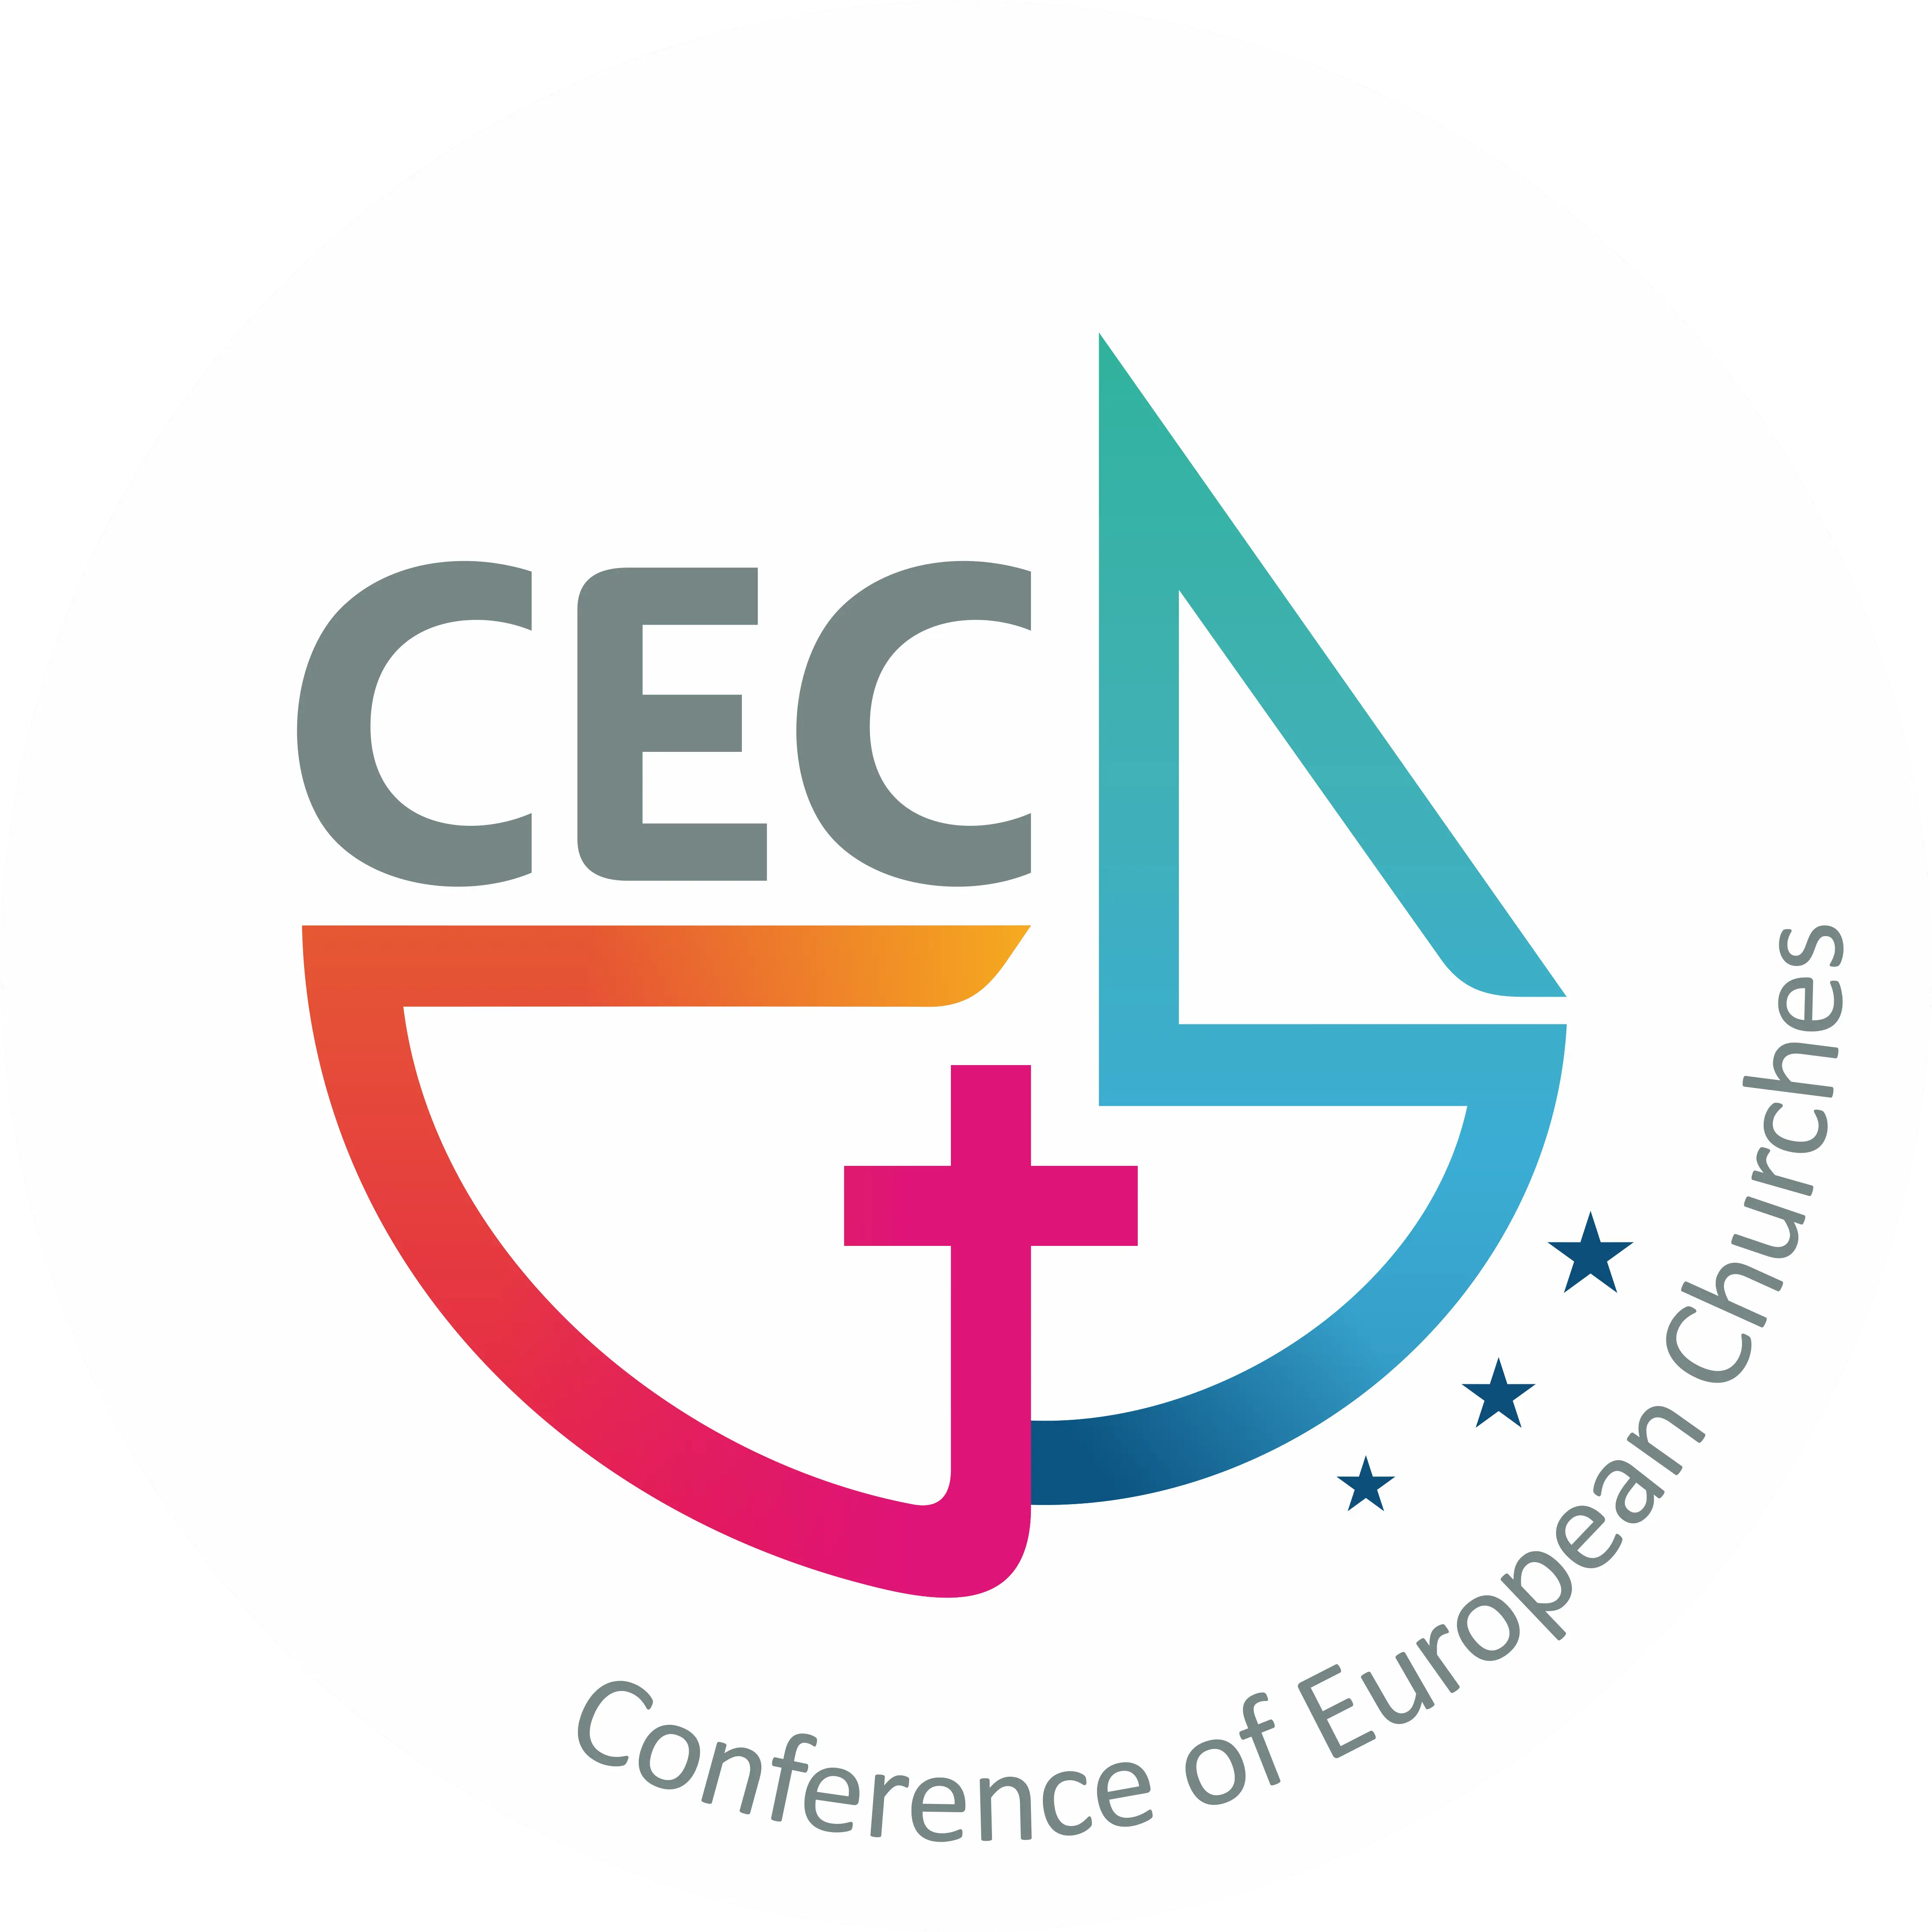 Logotyp Conforence of European Churches